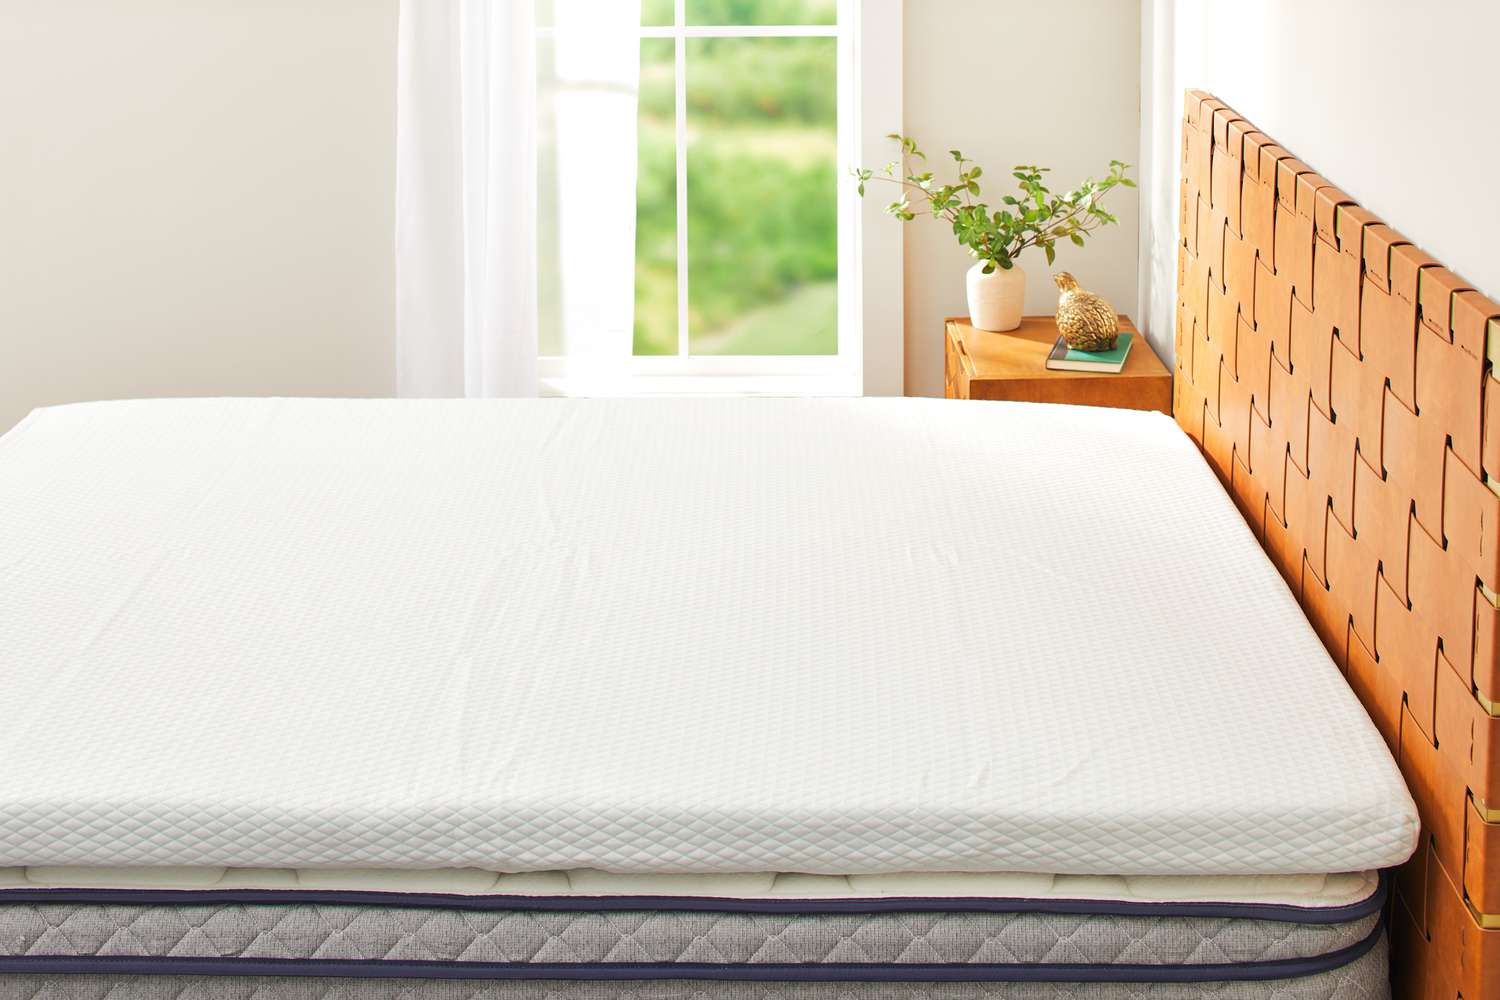 What Mattress Topper Do Chiropractors Recommend?